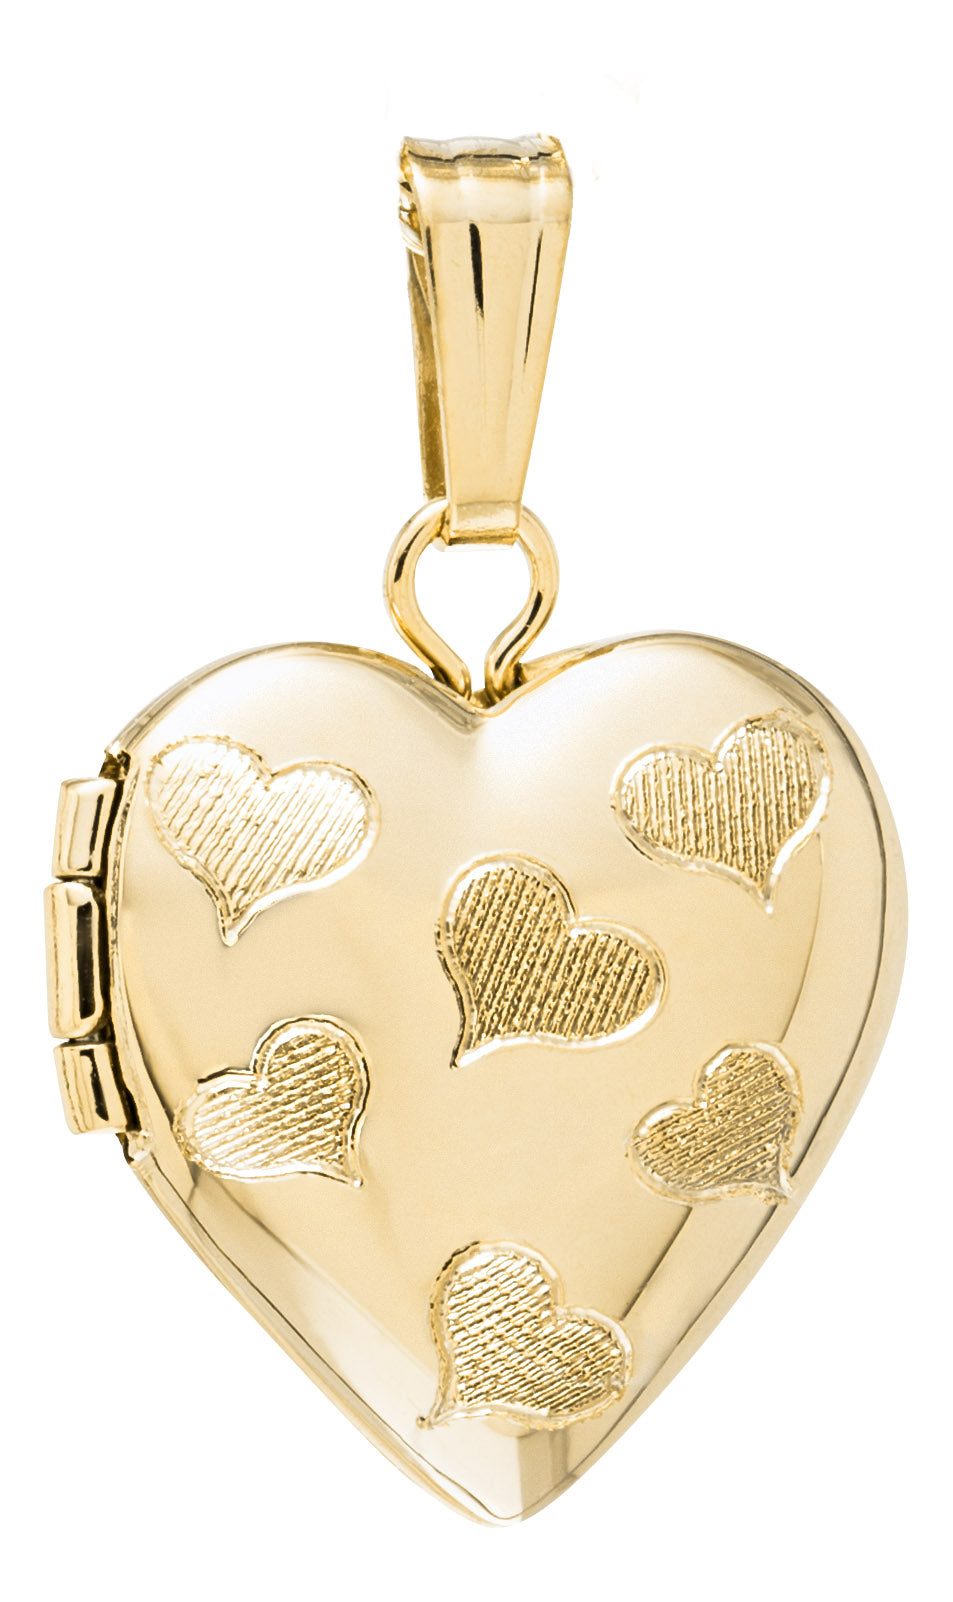 Sterling Silver Child's Heart Shaped Locket